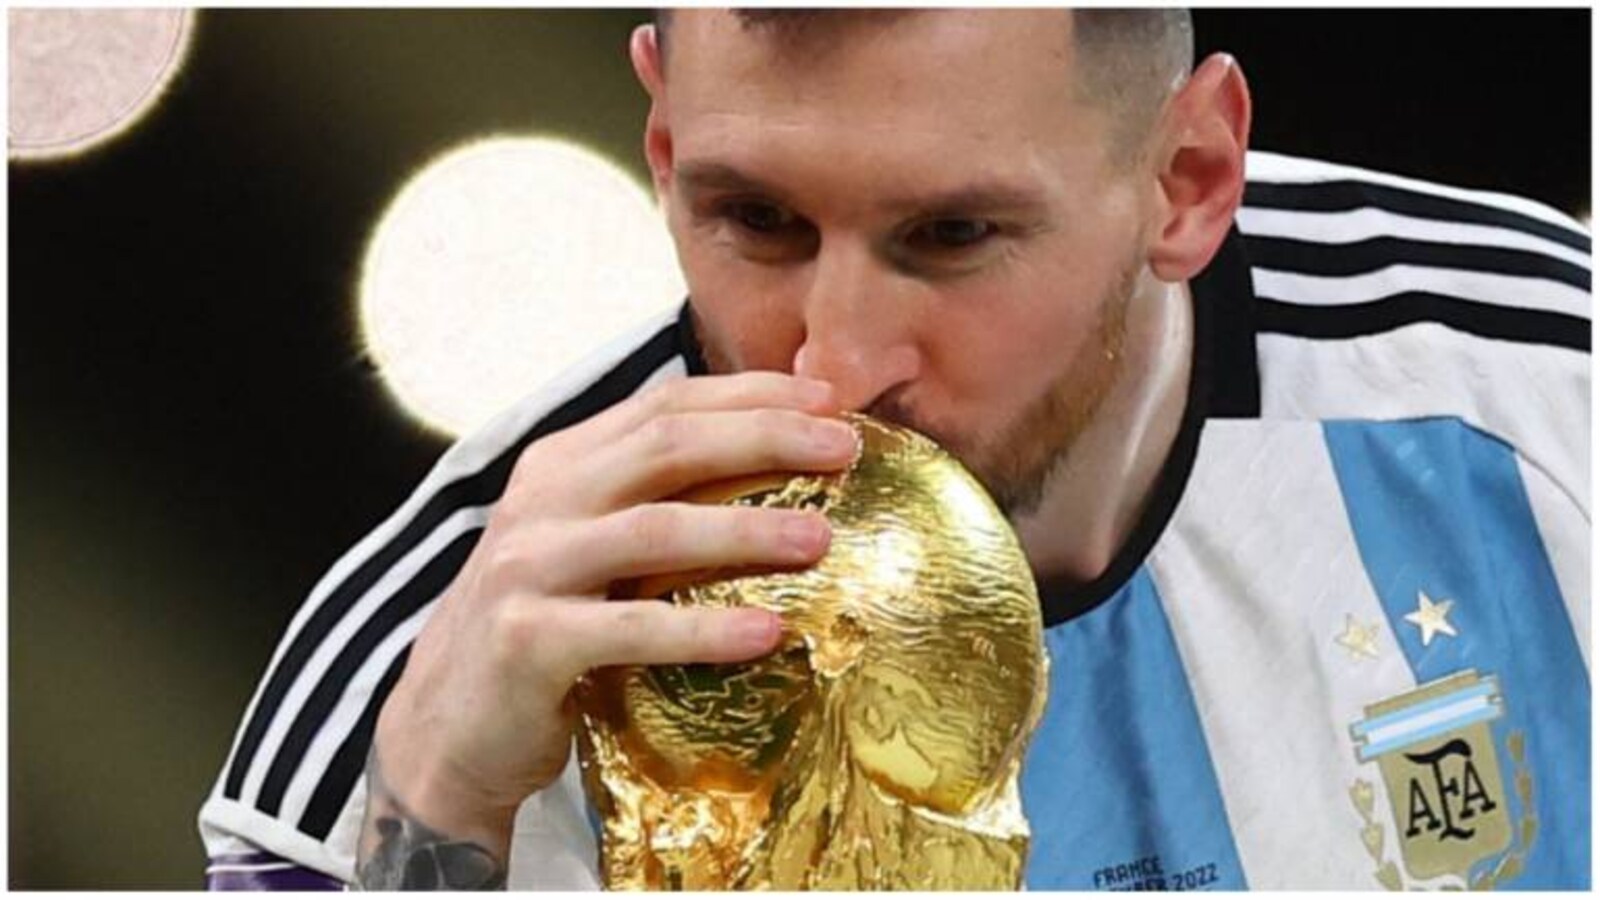 louis vuitton world cup messi